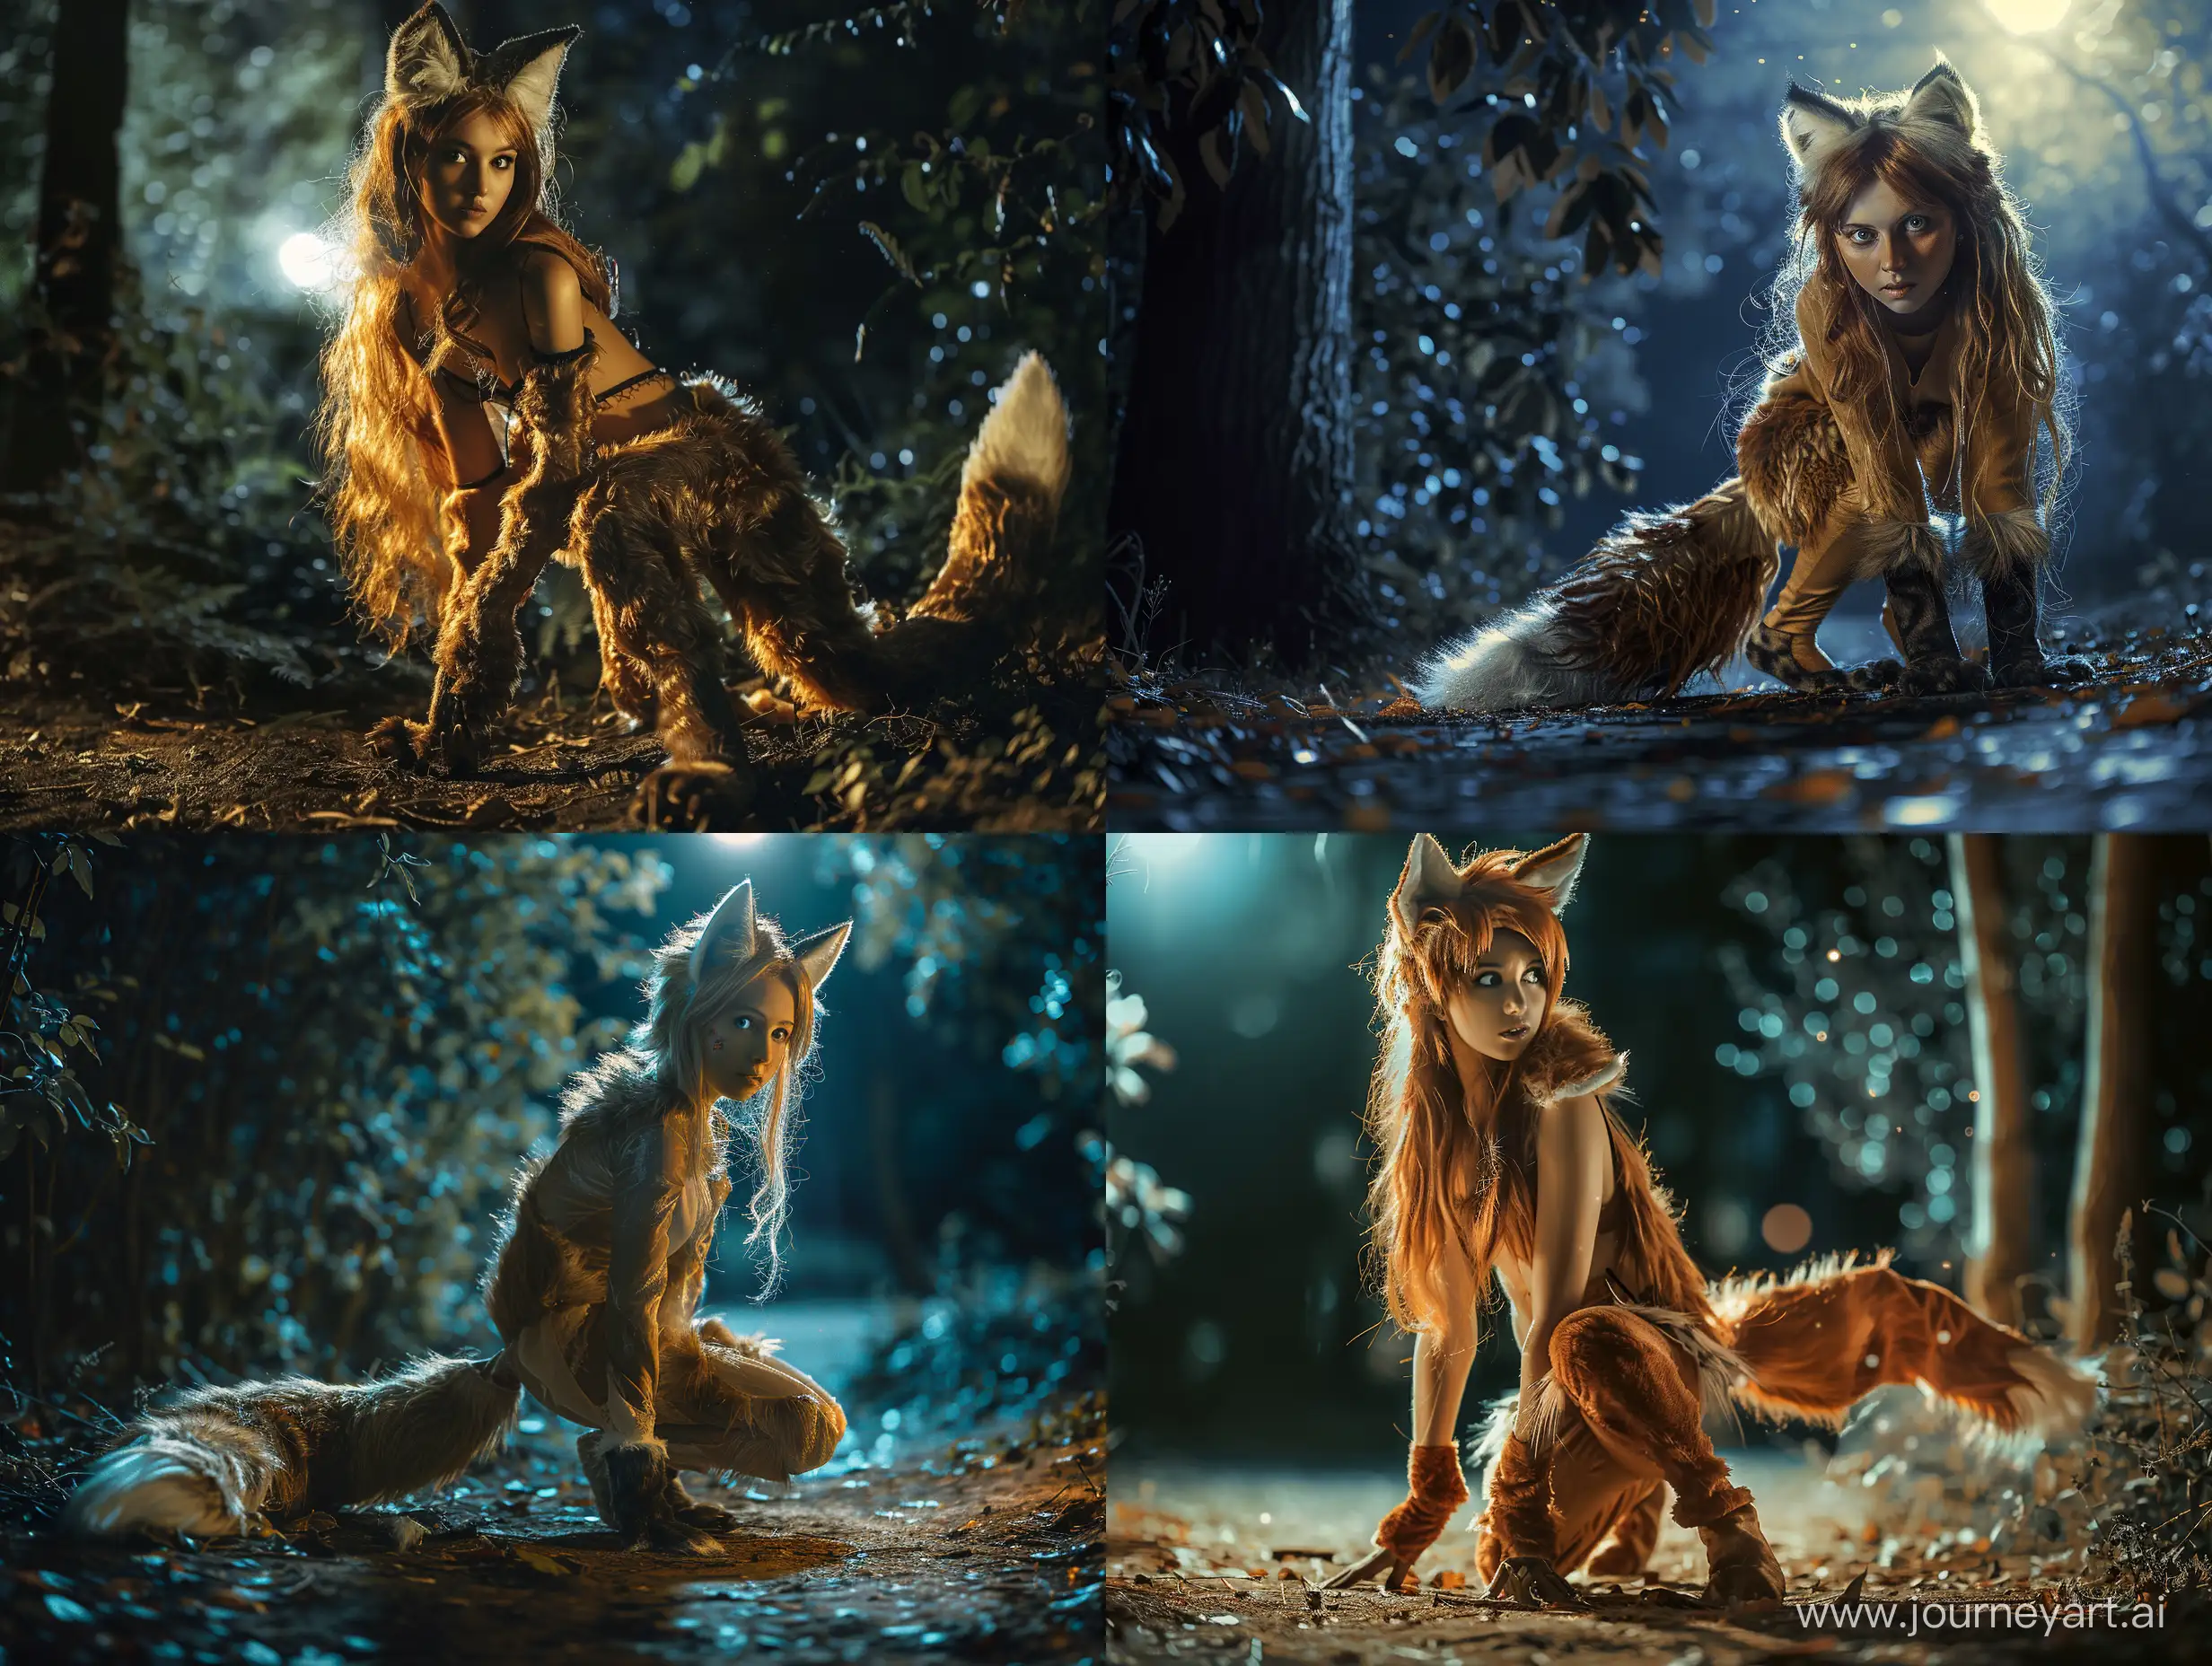 A photograph of a young woman who is transforming into a fox due to a magic spell. She has fur, a tail and paws. She is standing on all fours in a forest at night. Full body picture, moonlight